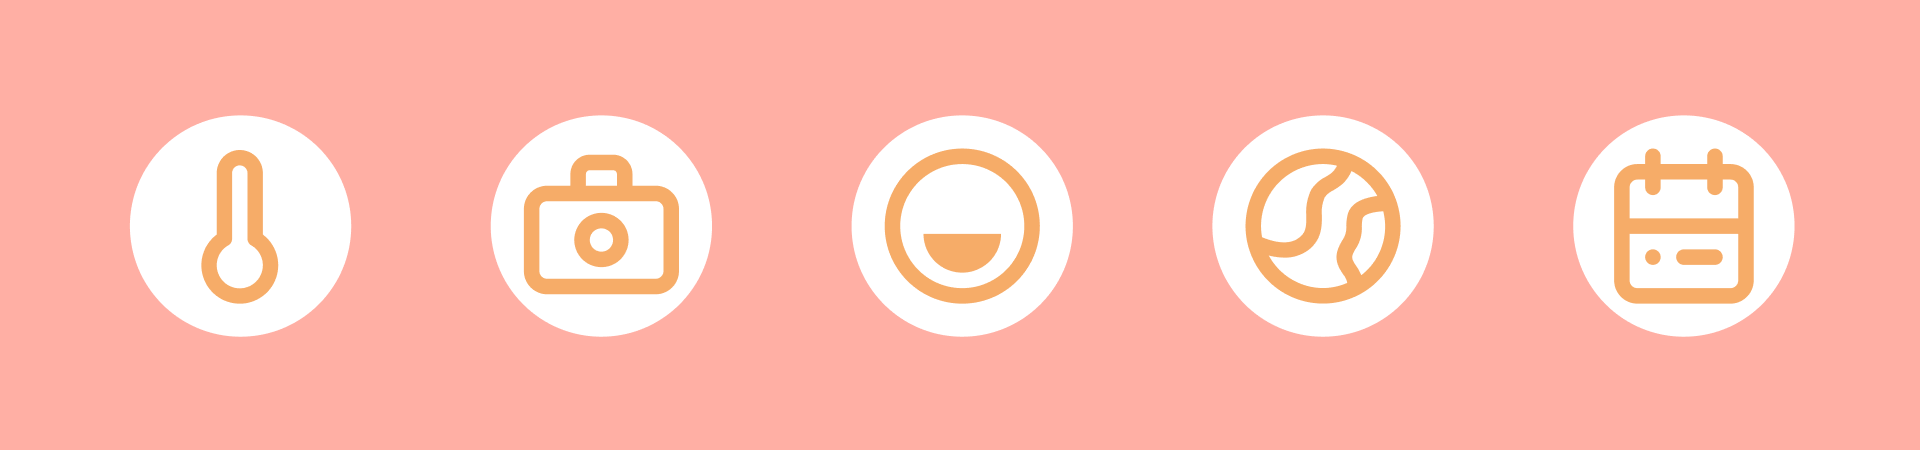 Orange-white icons on a salmon-colored background